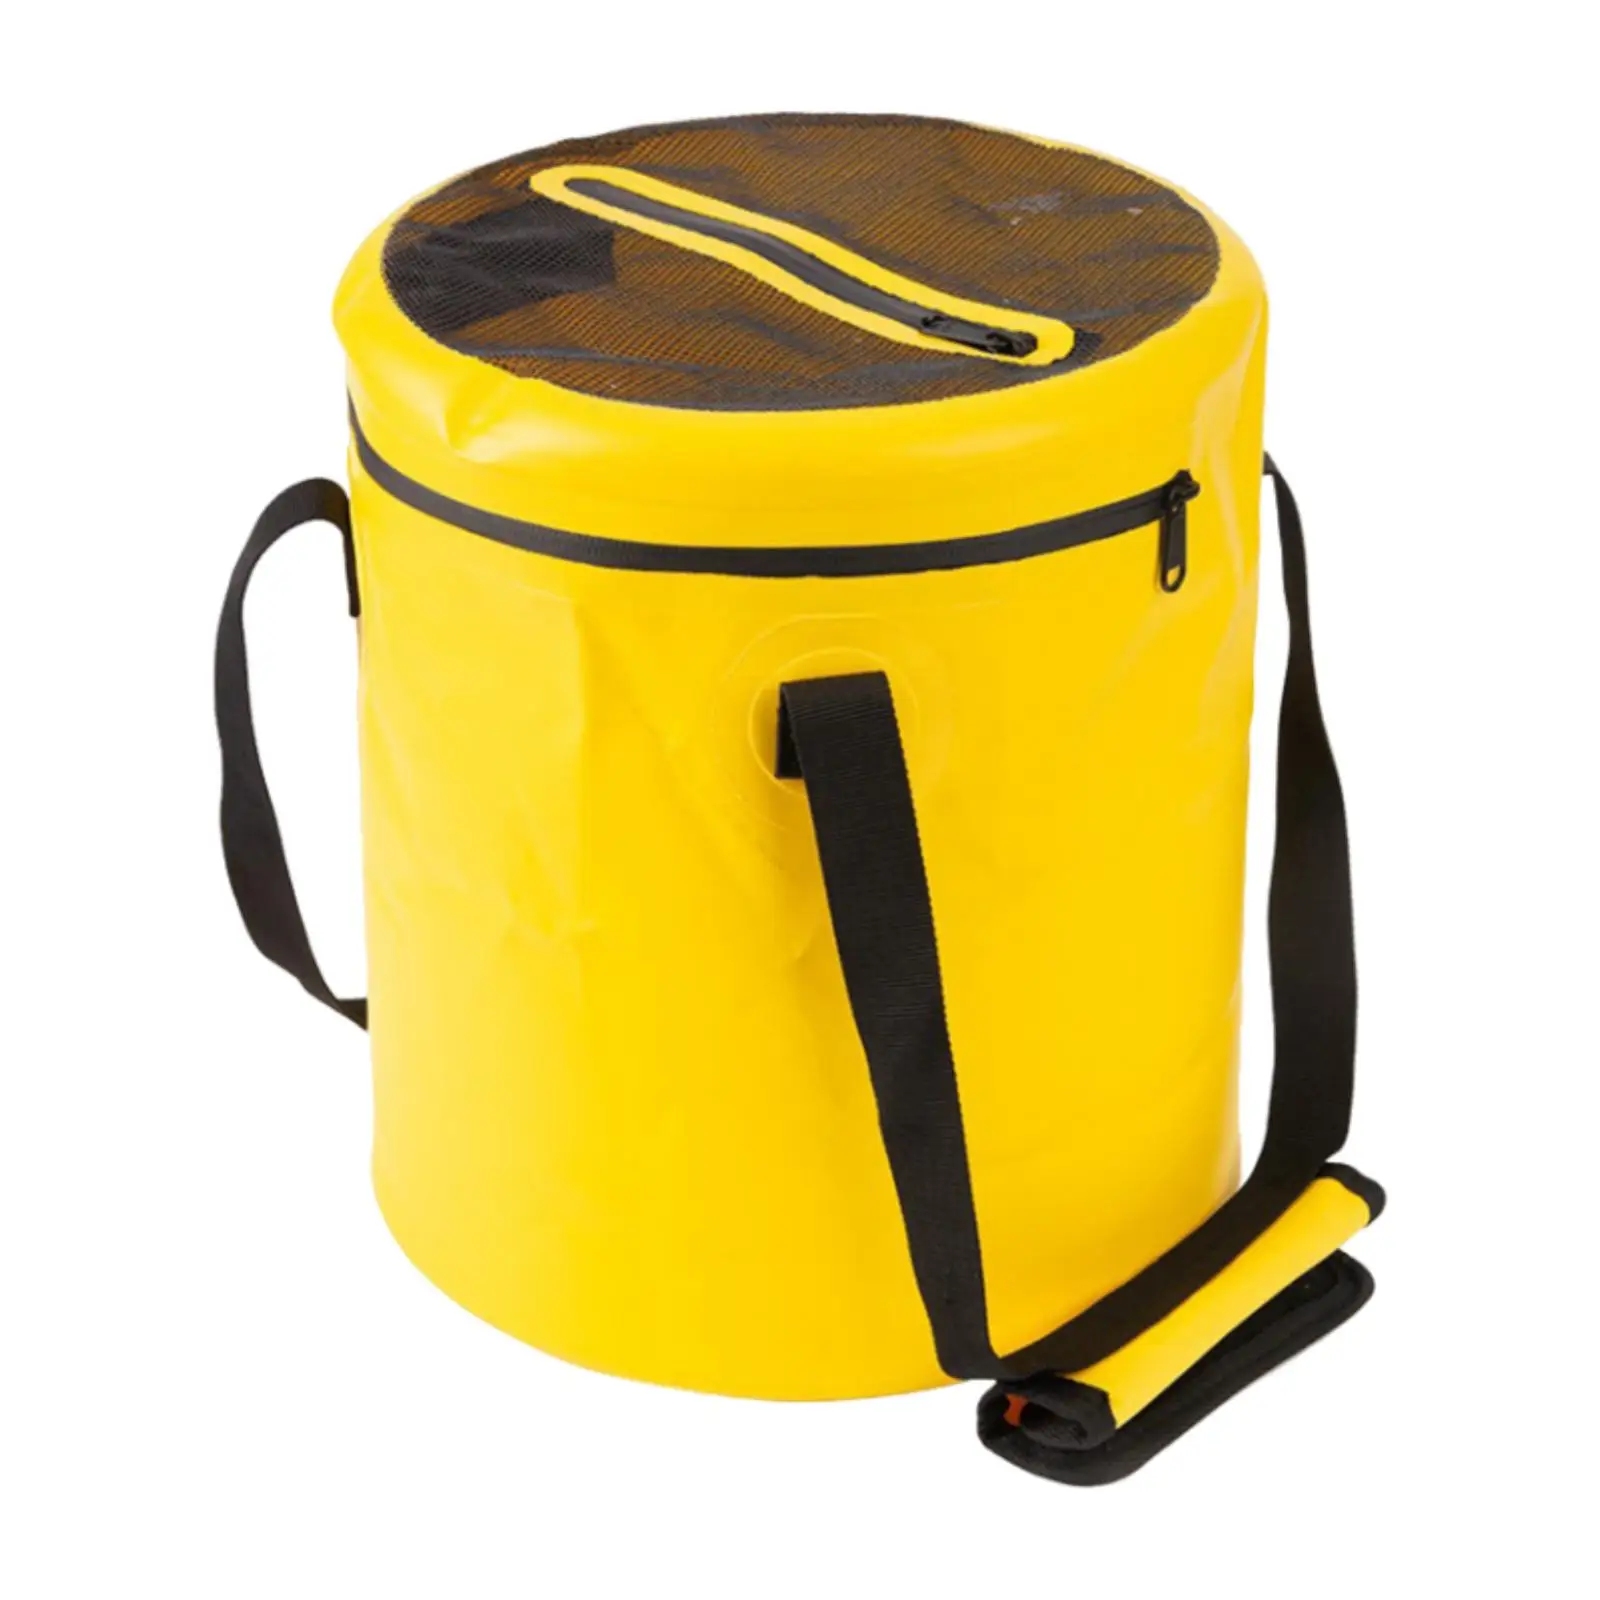 Collapsible Bucket with Lid, Wash Basin, Foldable Folding Bucket with Lid,